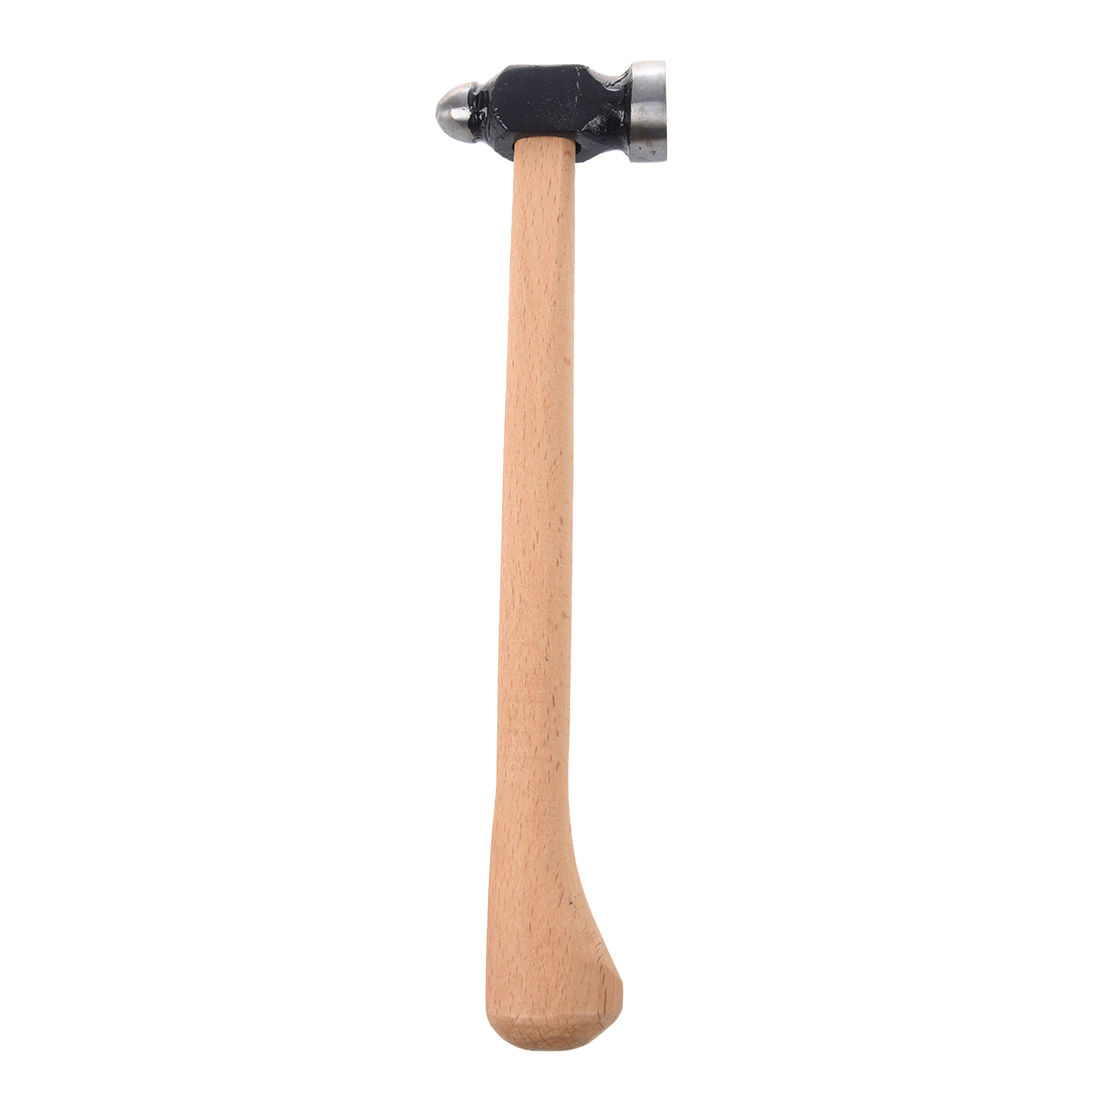 Planishing Chasing Hammer with Wooden Handle Jeweler / Goldsmith Tool Drop Shipping